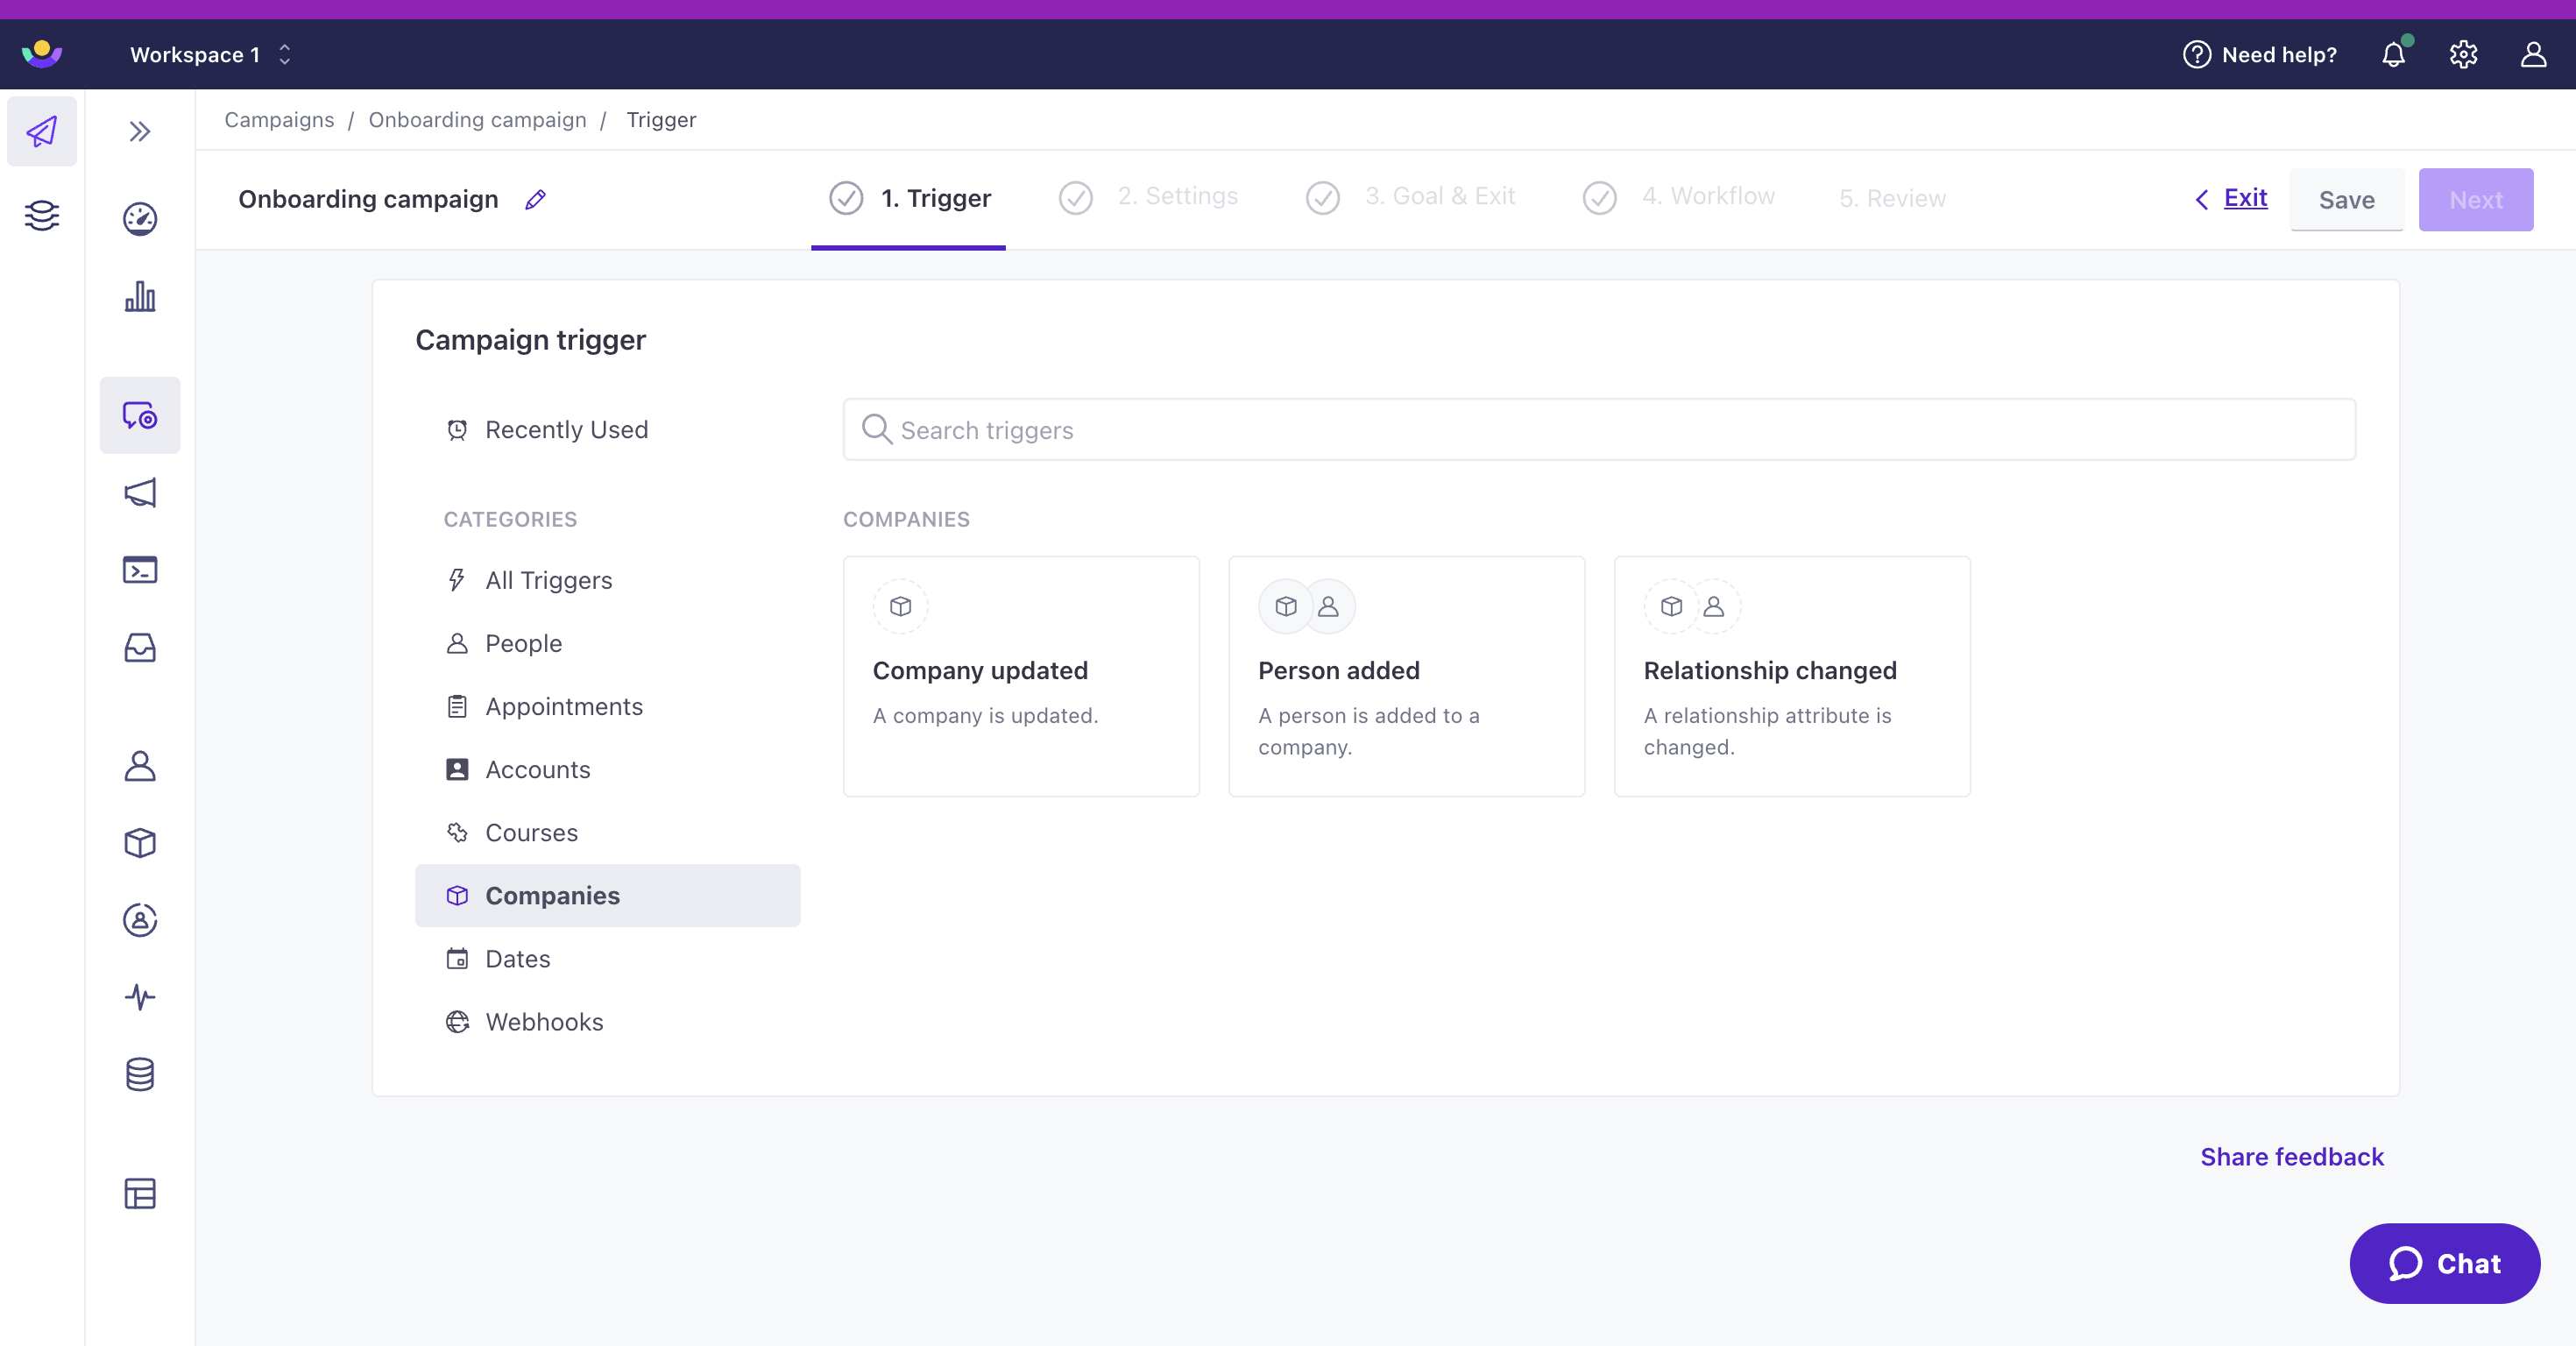 The new campaign trigger selection page where Companies, one of the object types in the workspace, is selected. There are three trigger options: Company updated, Person added, and Relationship changed.